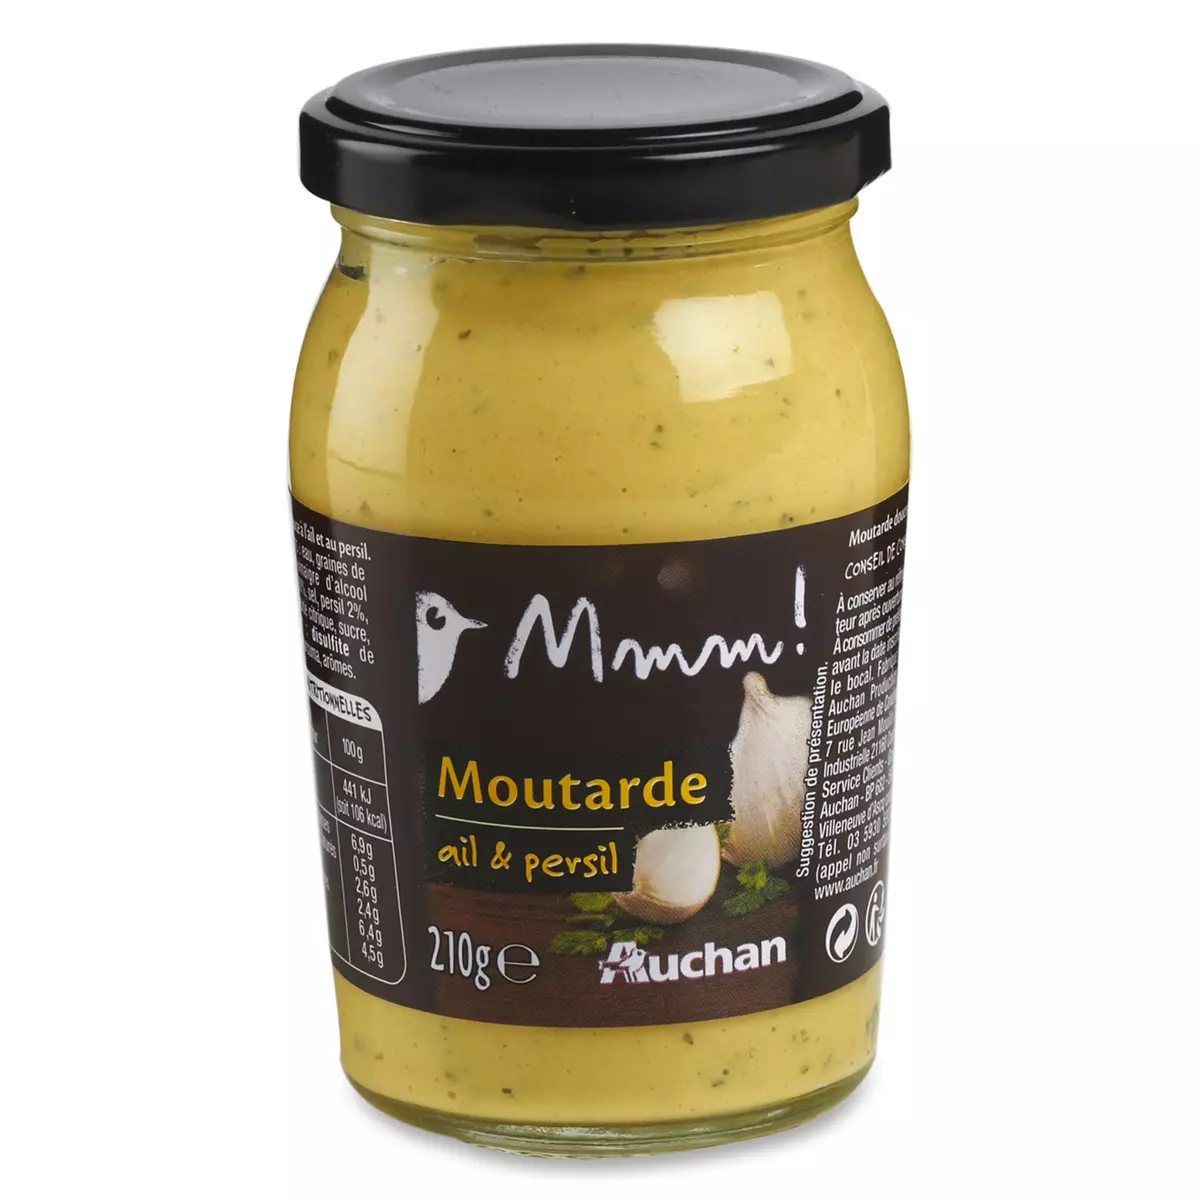 AUCHAN MMM! Moutarde ail et persil 210g